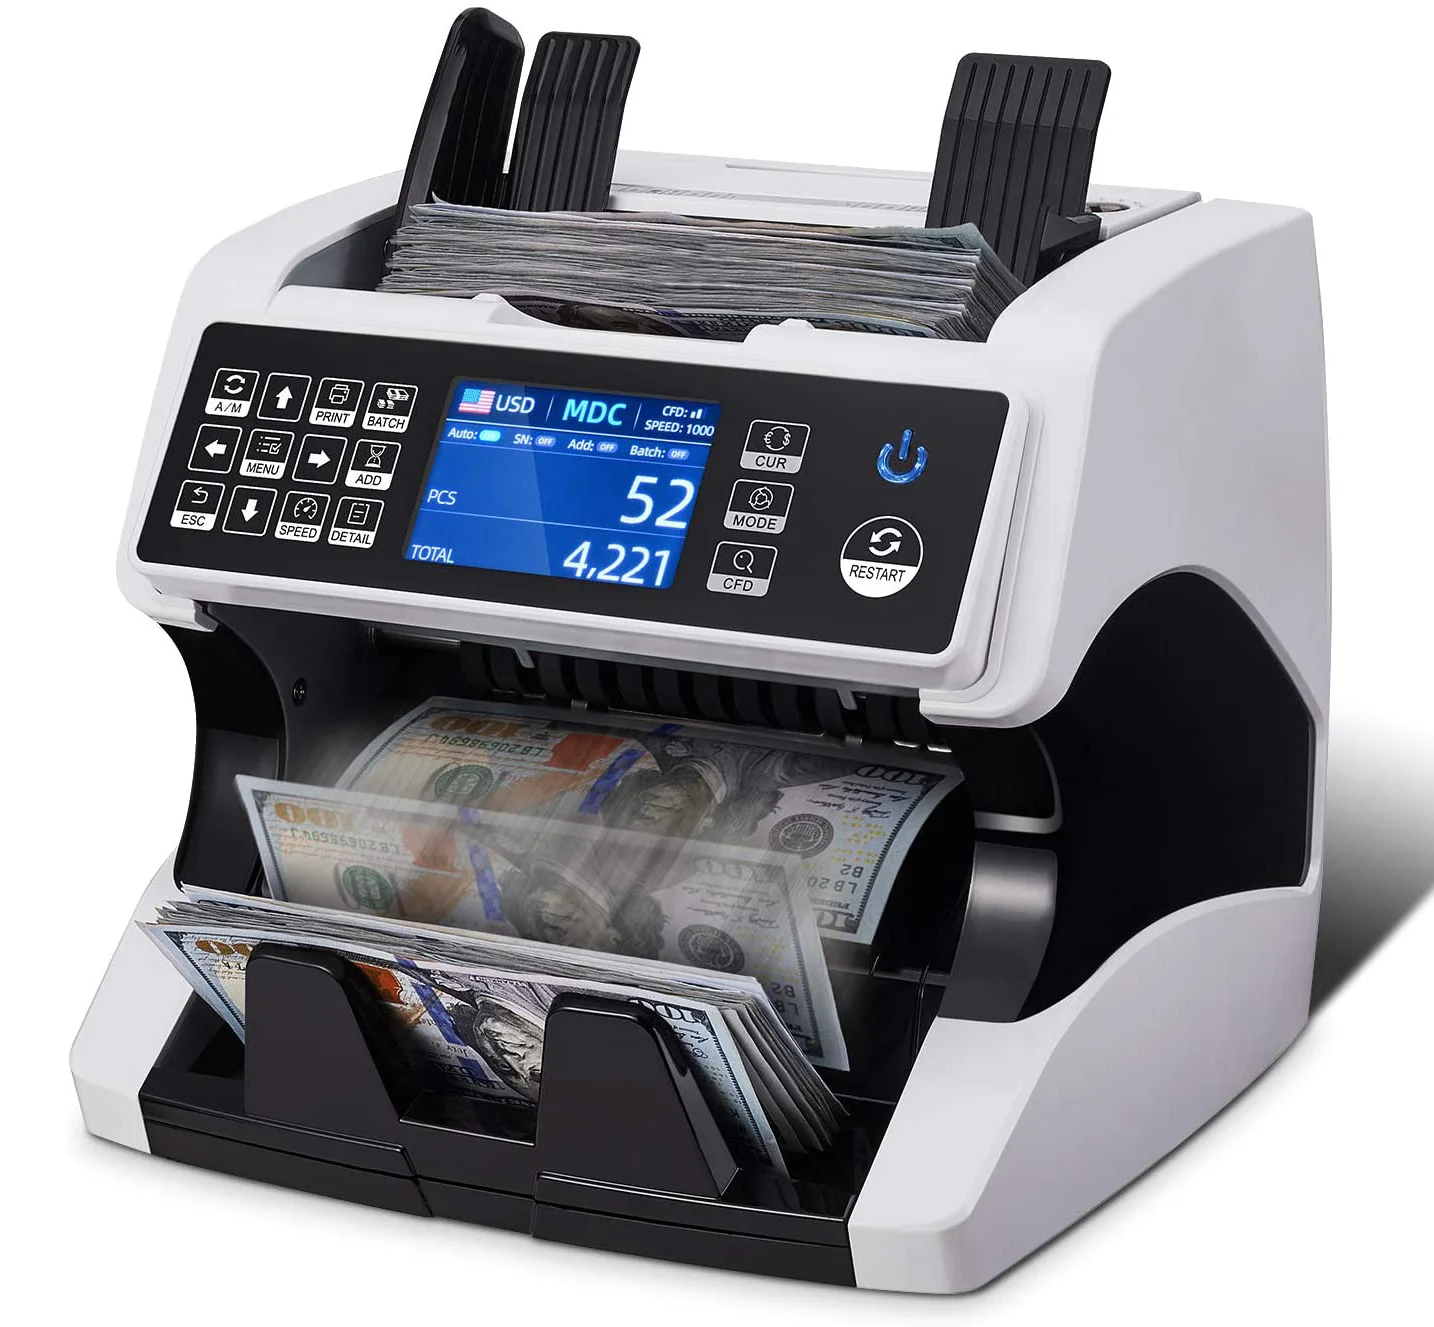 

Money Bill Counter Business Cash Register Fake Banknote Detector for USD, EUR, GBP, CAD, MXN mix bill value counting machine